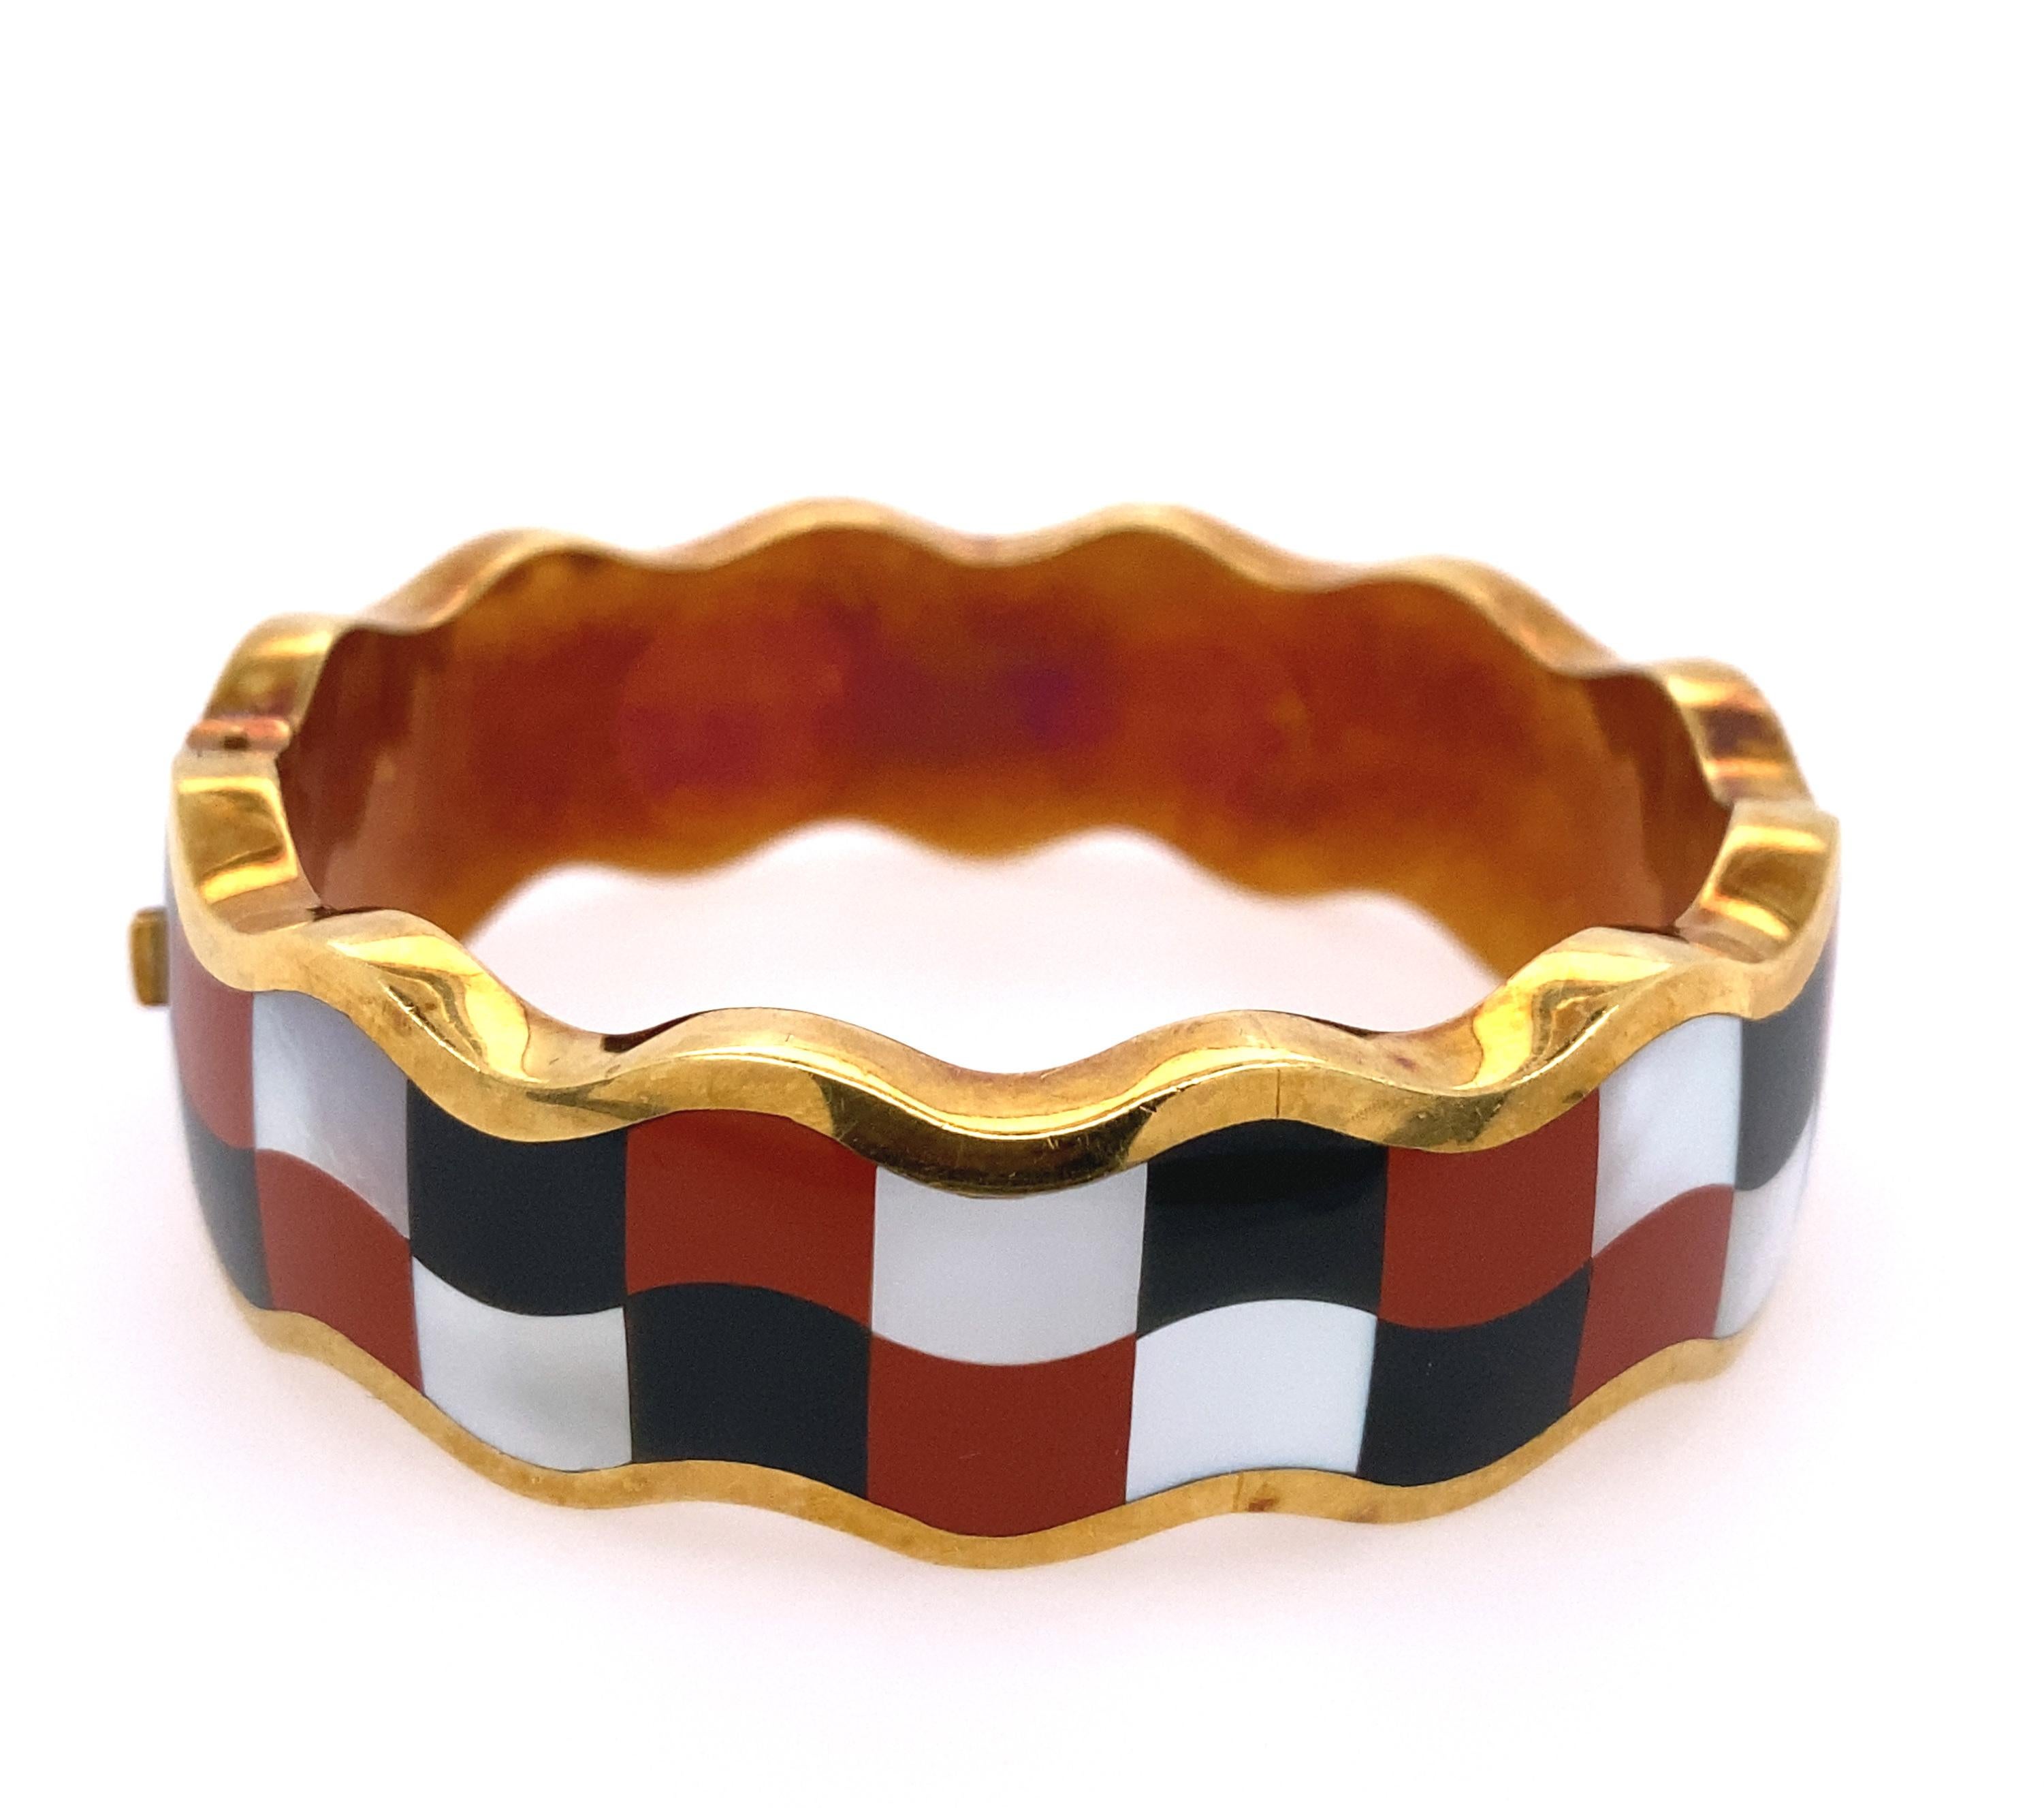 Tiffany & Co, Gold, Black Jade,  Mother-of-Pearl and Jasper 'Checkboard' Bangle bracelet. 
18k, the wavy bangle inlaid with check board pattern of black jade, mother of pearl and jasper way rectangles, signed Tiffany & Co.
Total weight  35.1 dwt.